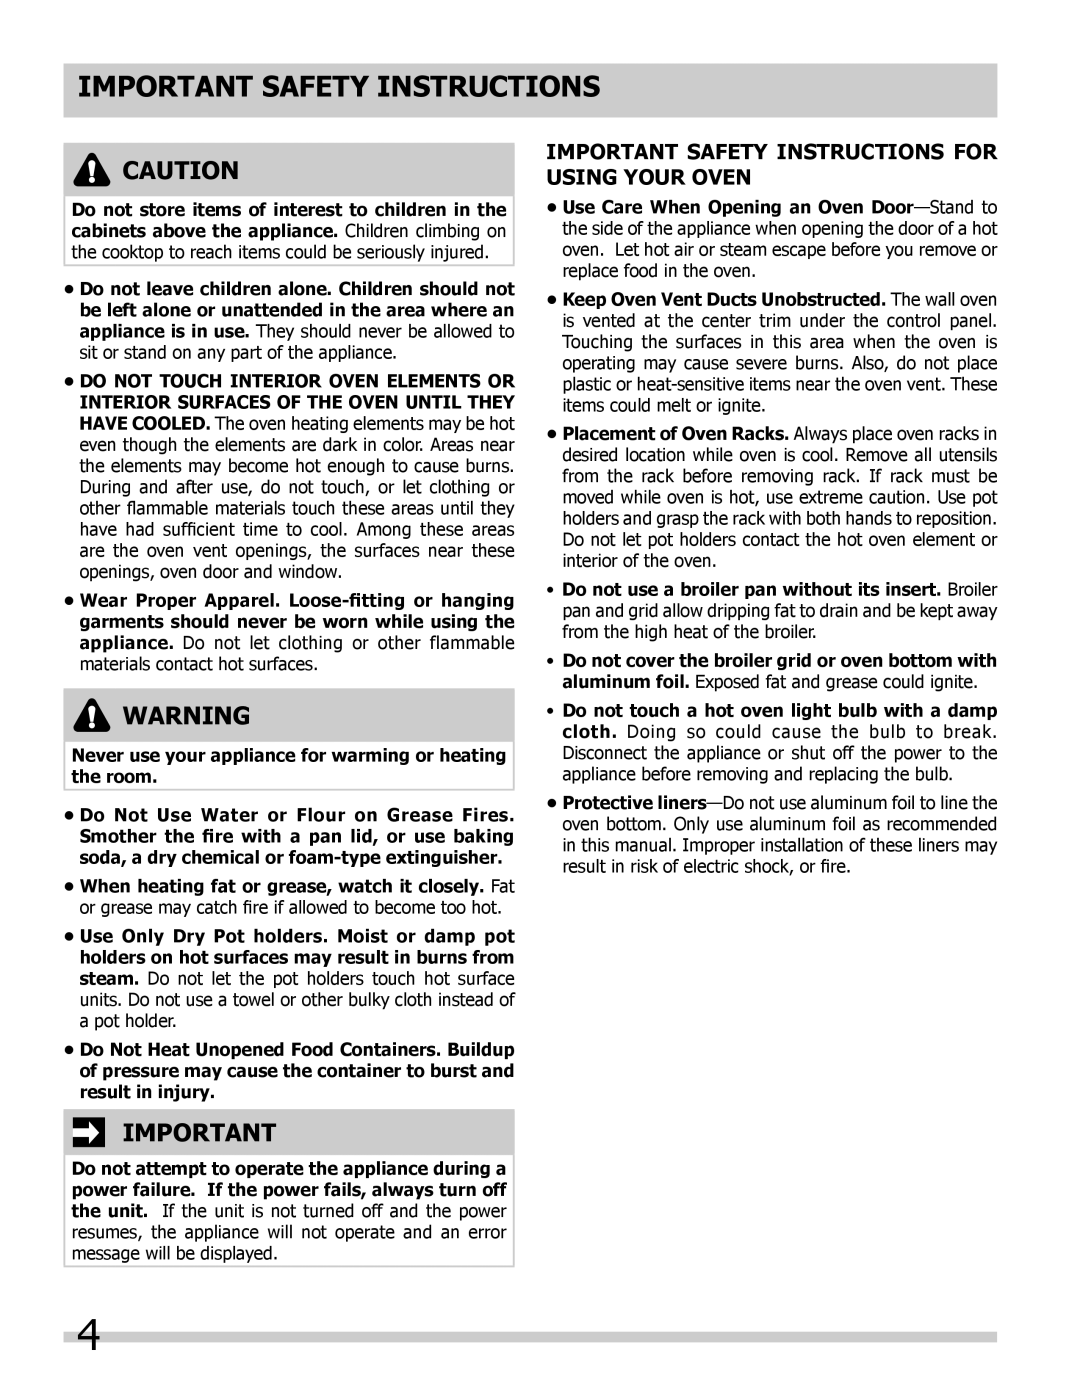 Frigidaire 318205325 Important Safety Instructions For Using Your Oven, Do Not Touch Interior Oven Elements Or 